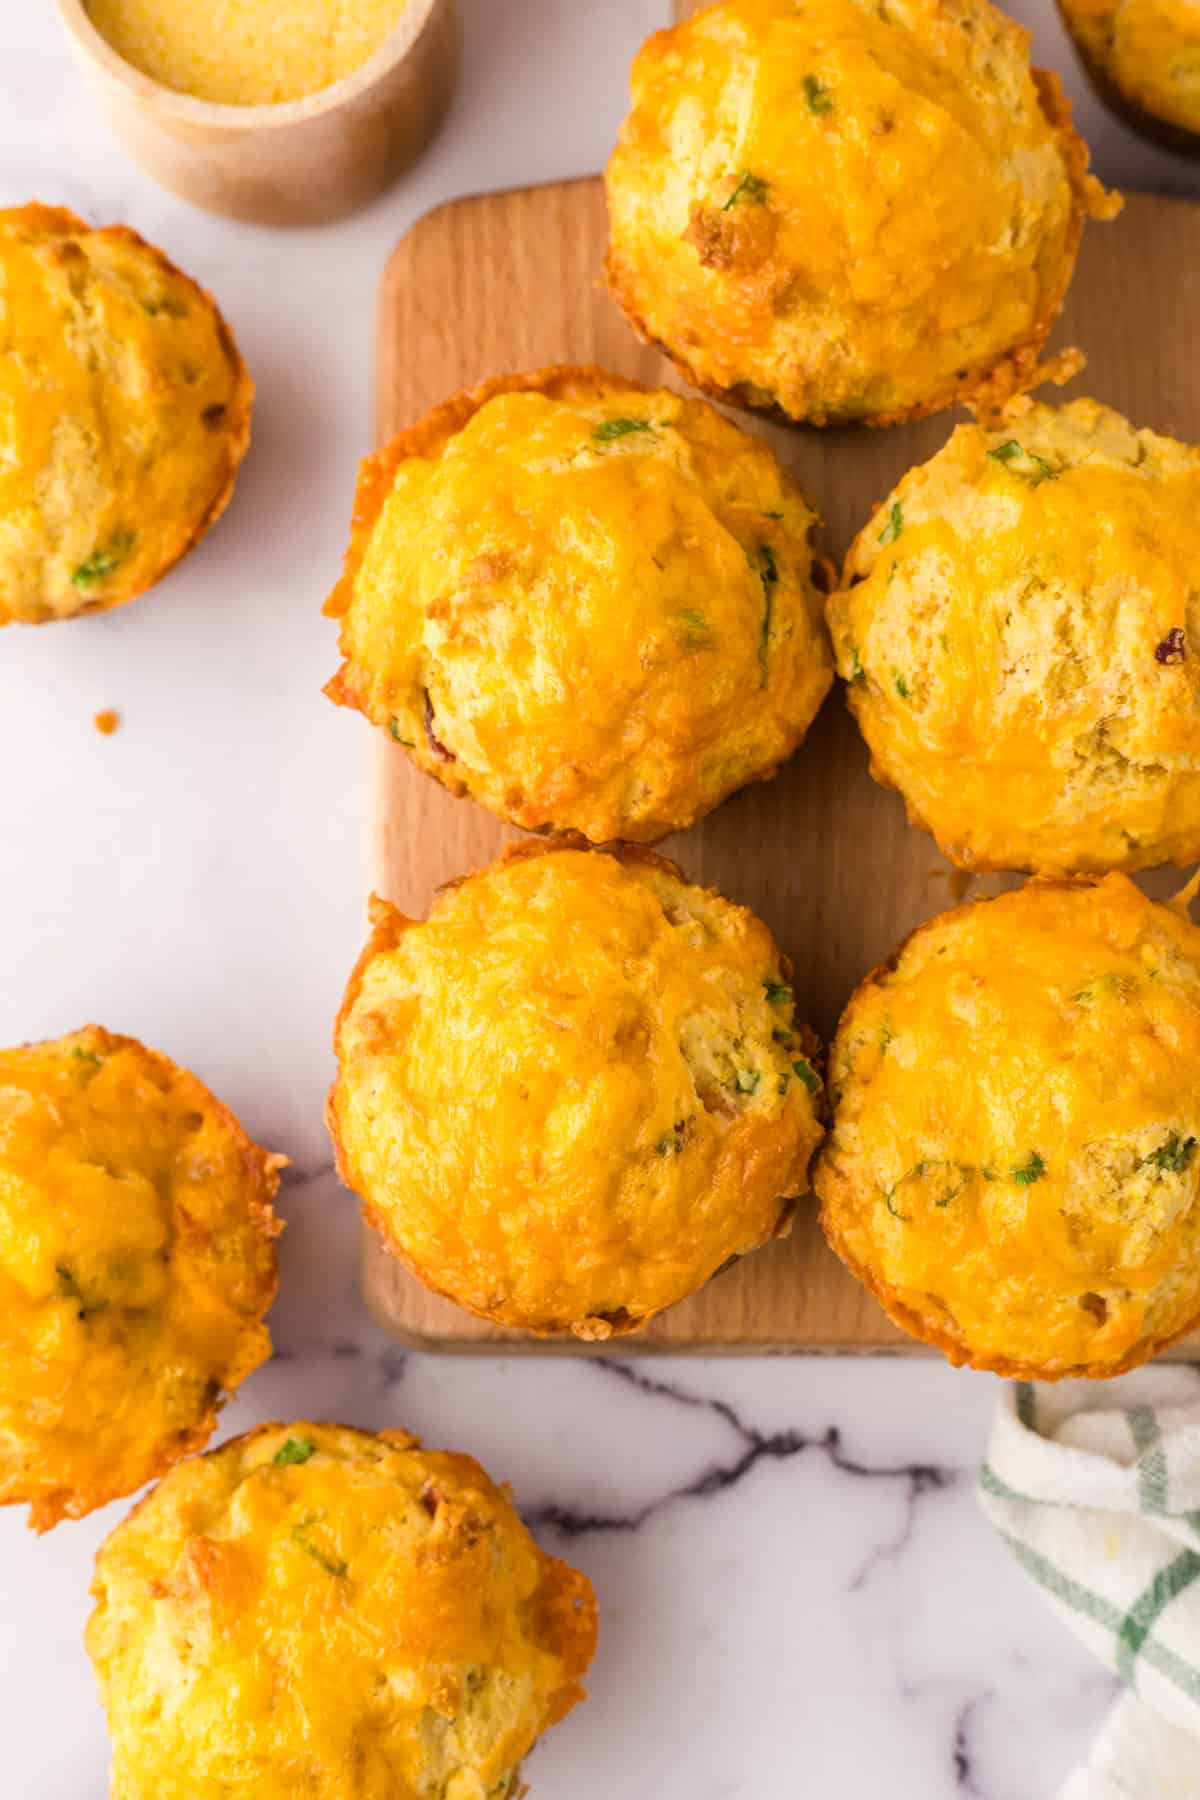 baked cheddar bacon cornbread muffins on a wooden board.